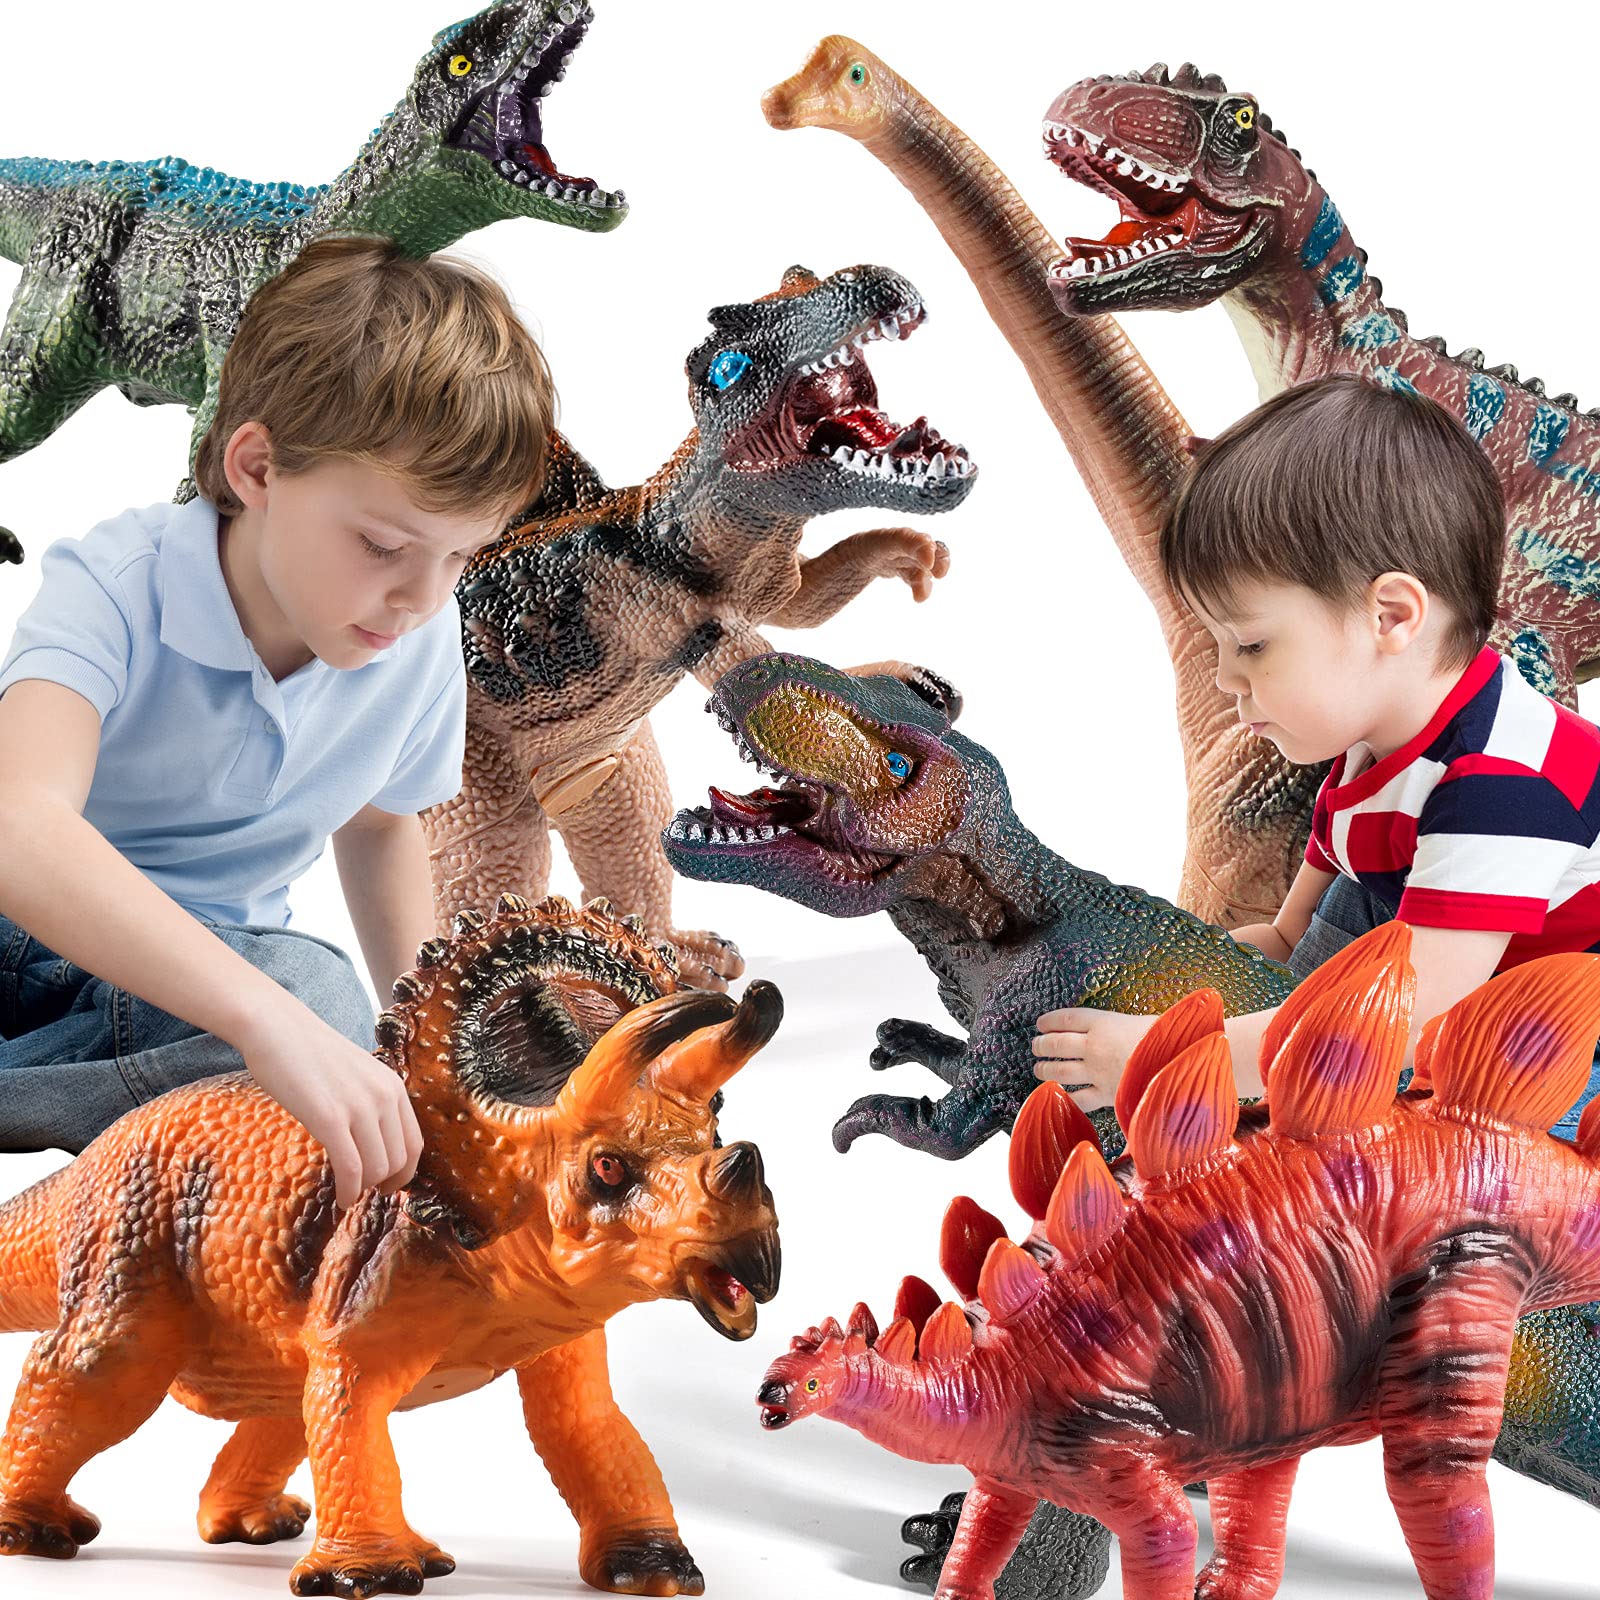 TEMI 7 Pieces Jumbo Dinosaur Toys for Kids and Toddlers,Jurassic World Dinosaur T-Rex Triceratops, Large Soft Dinosaur Toys Set for Dinosaur Lovers - Dinosaur Party Favors, Birthday Gifts